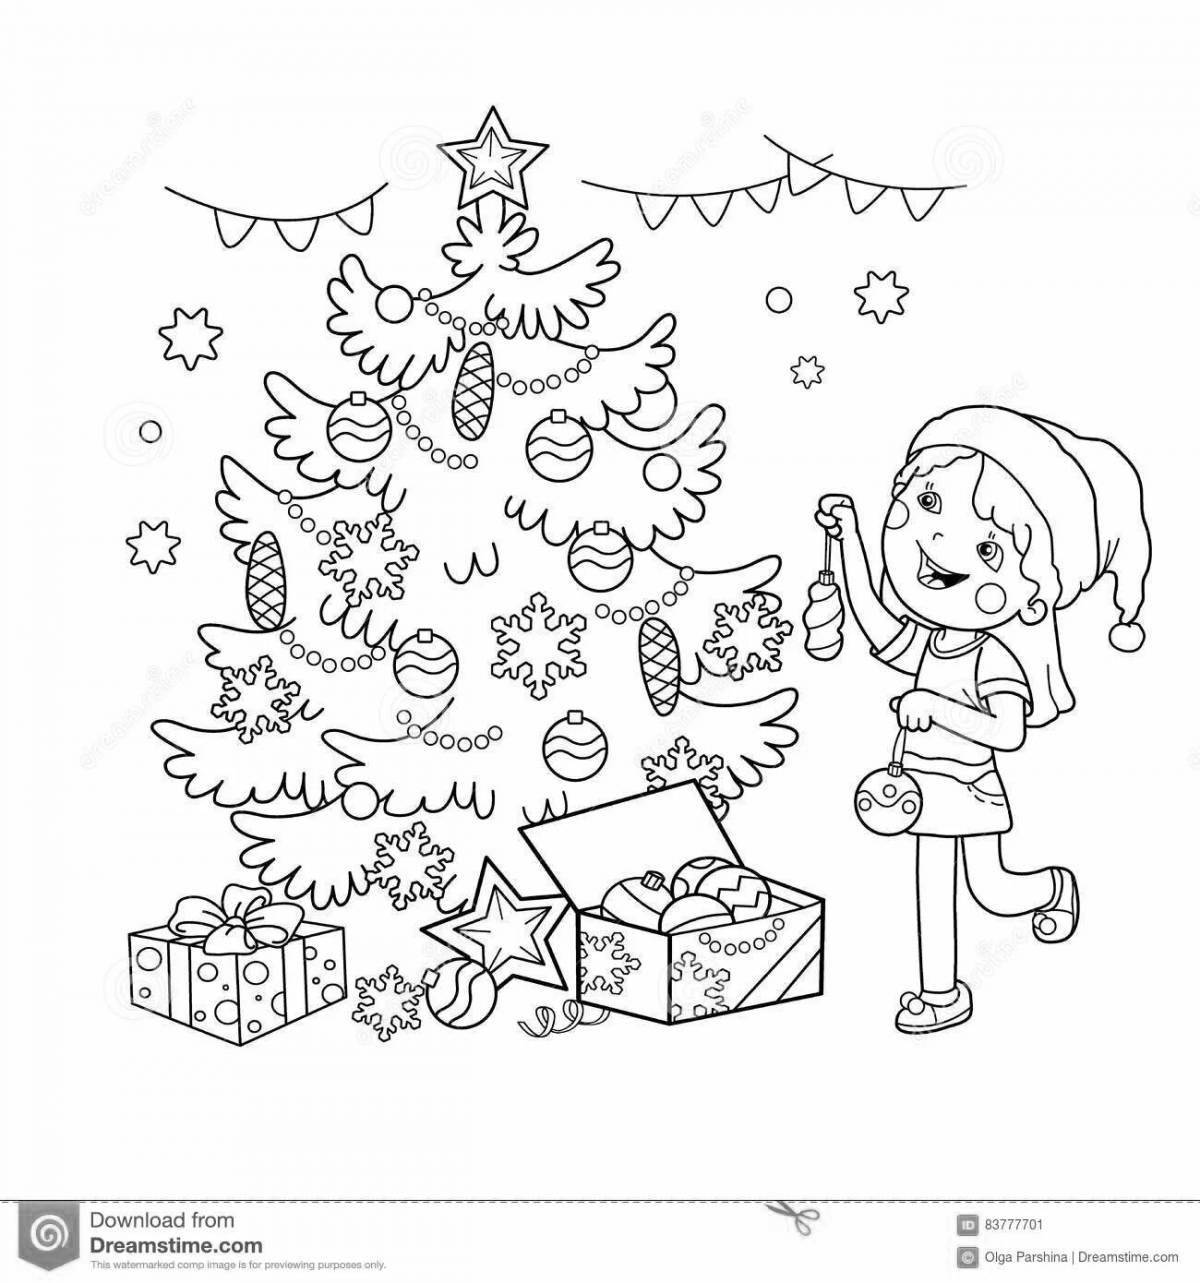 Excited children decorate the Christmas tree